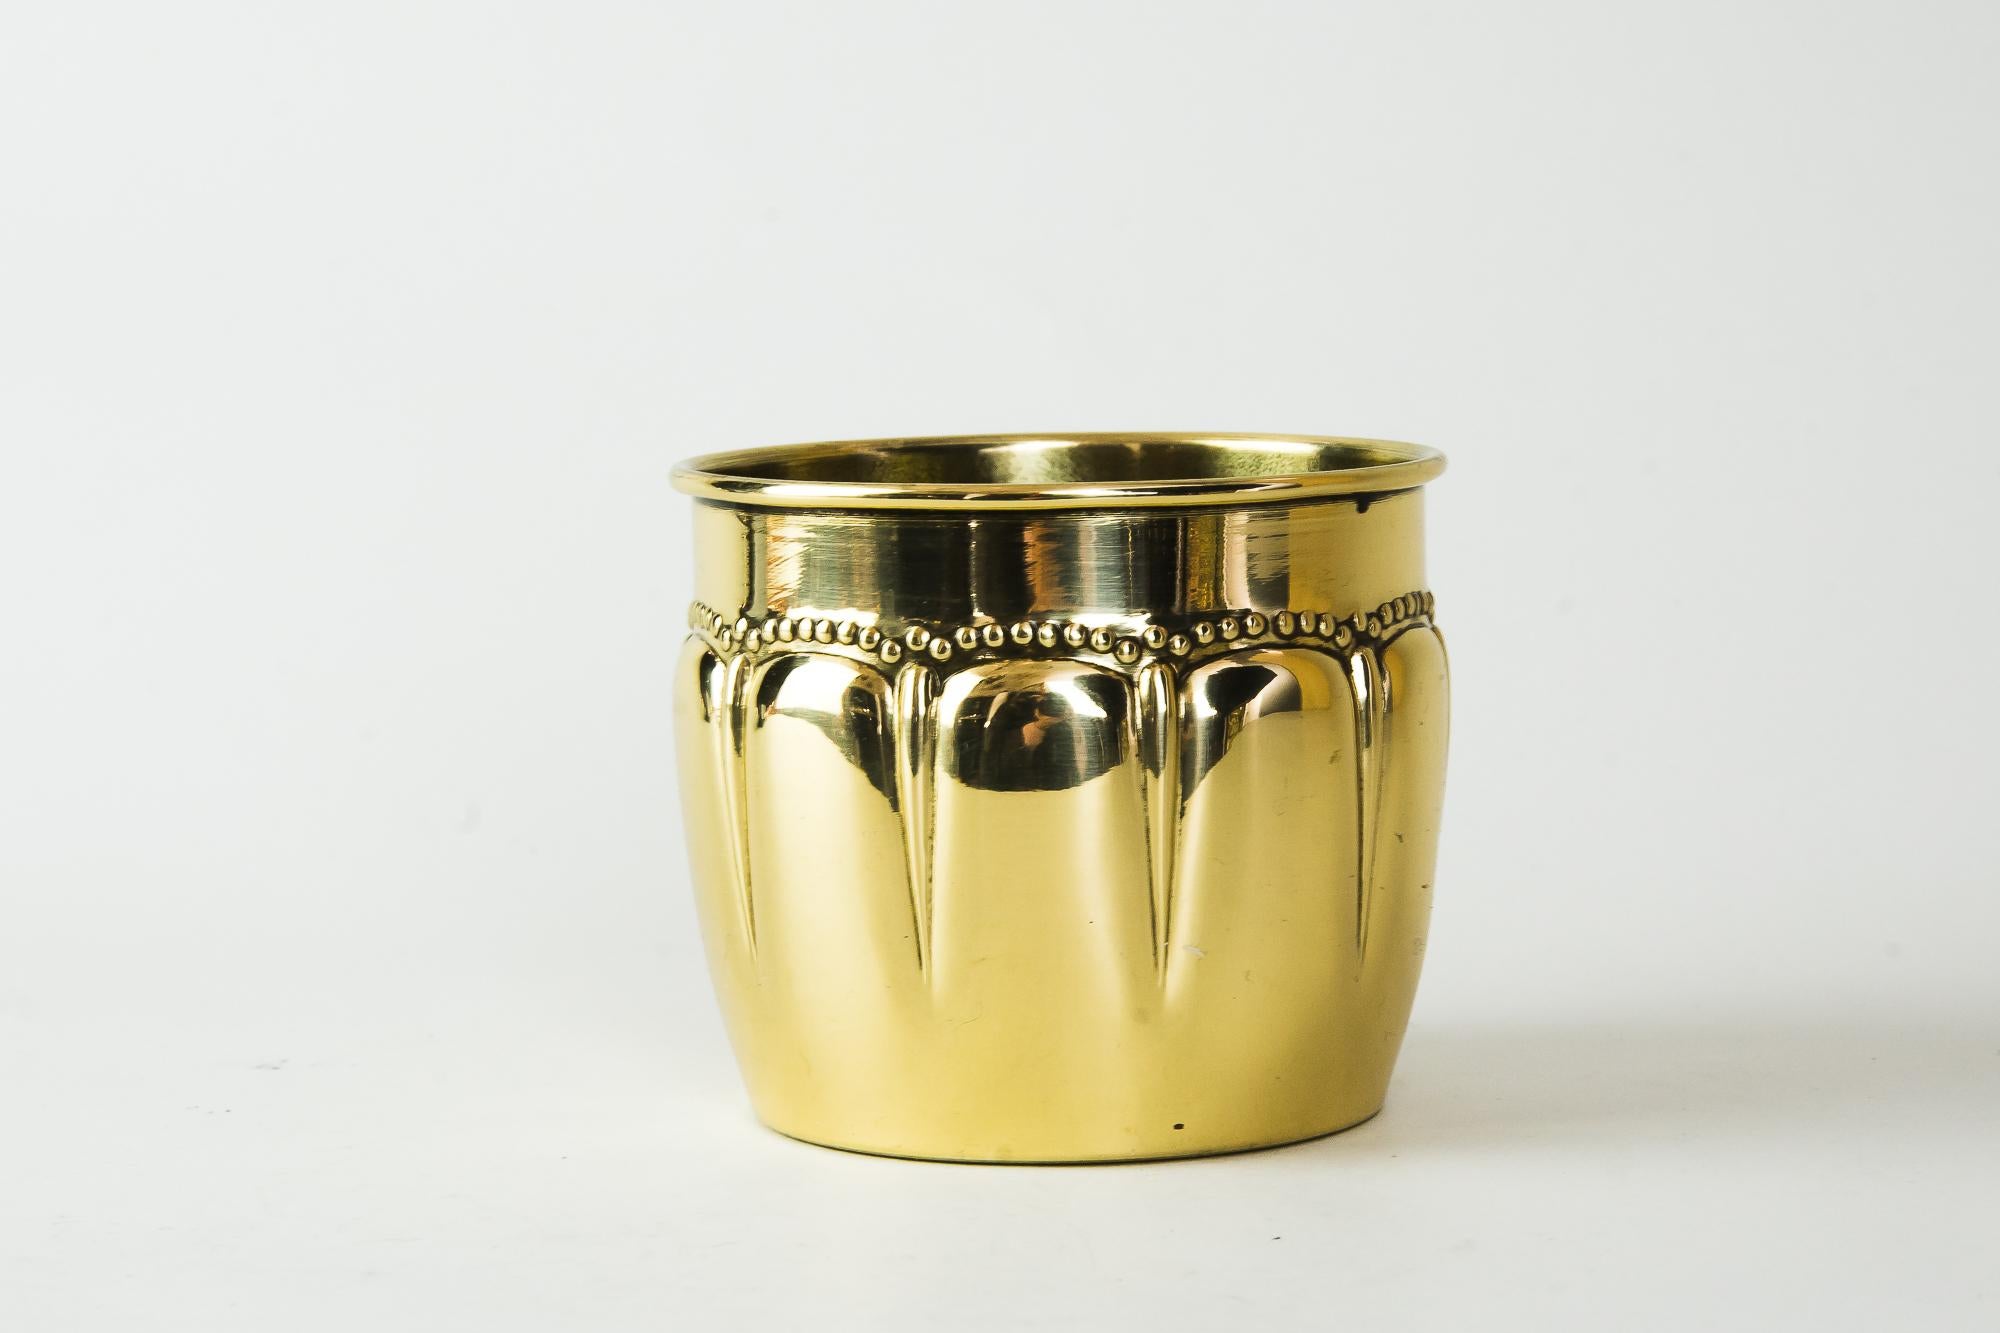 Small Art Deco flower pot, Vienna, circa 1920s
Brass polished and stove enameled.